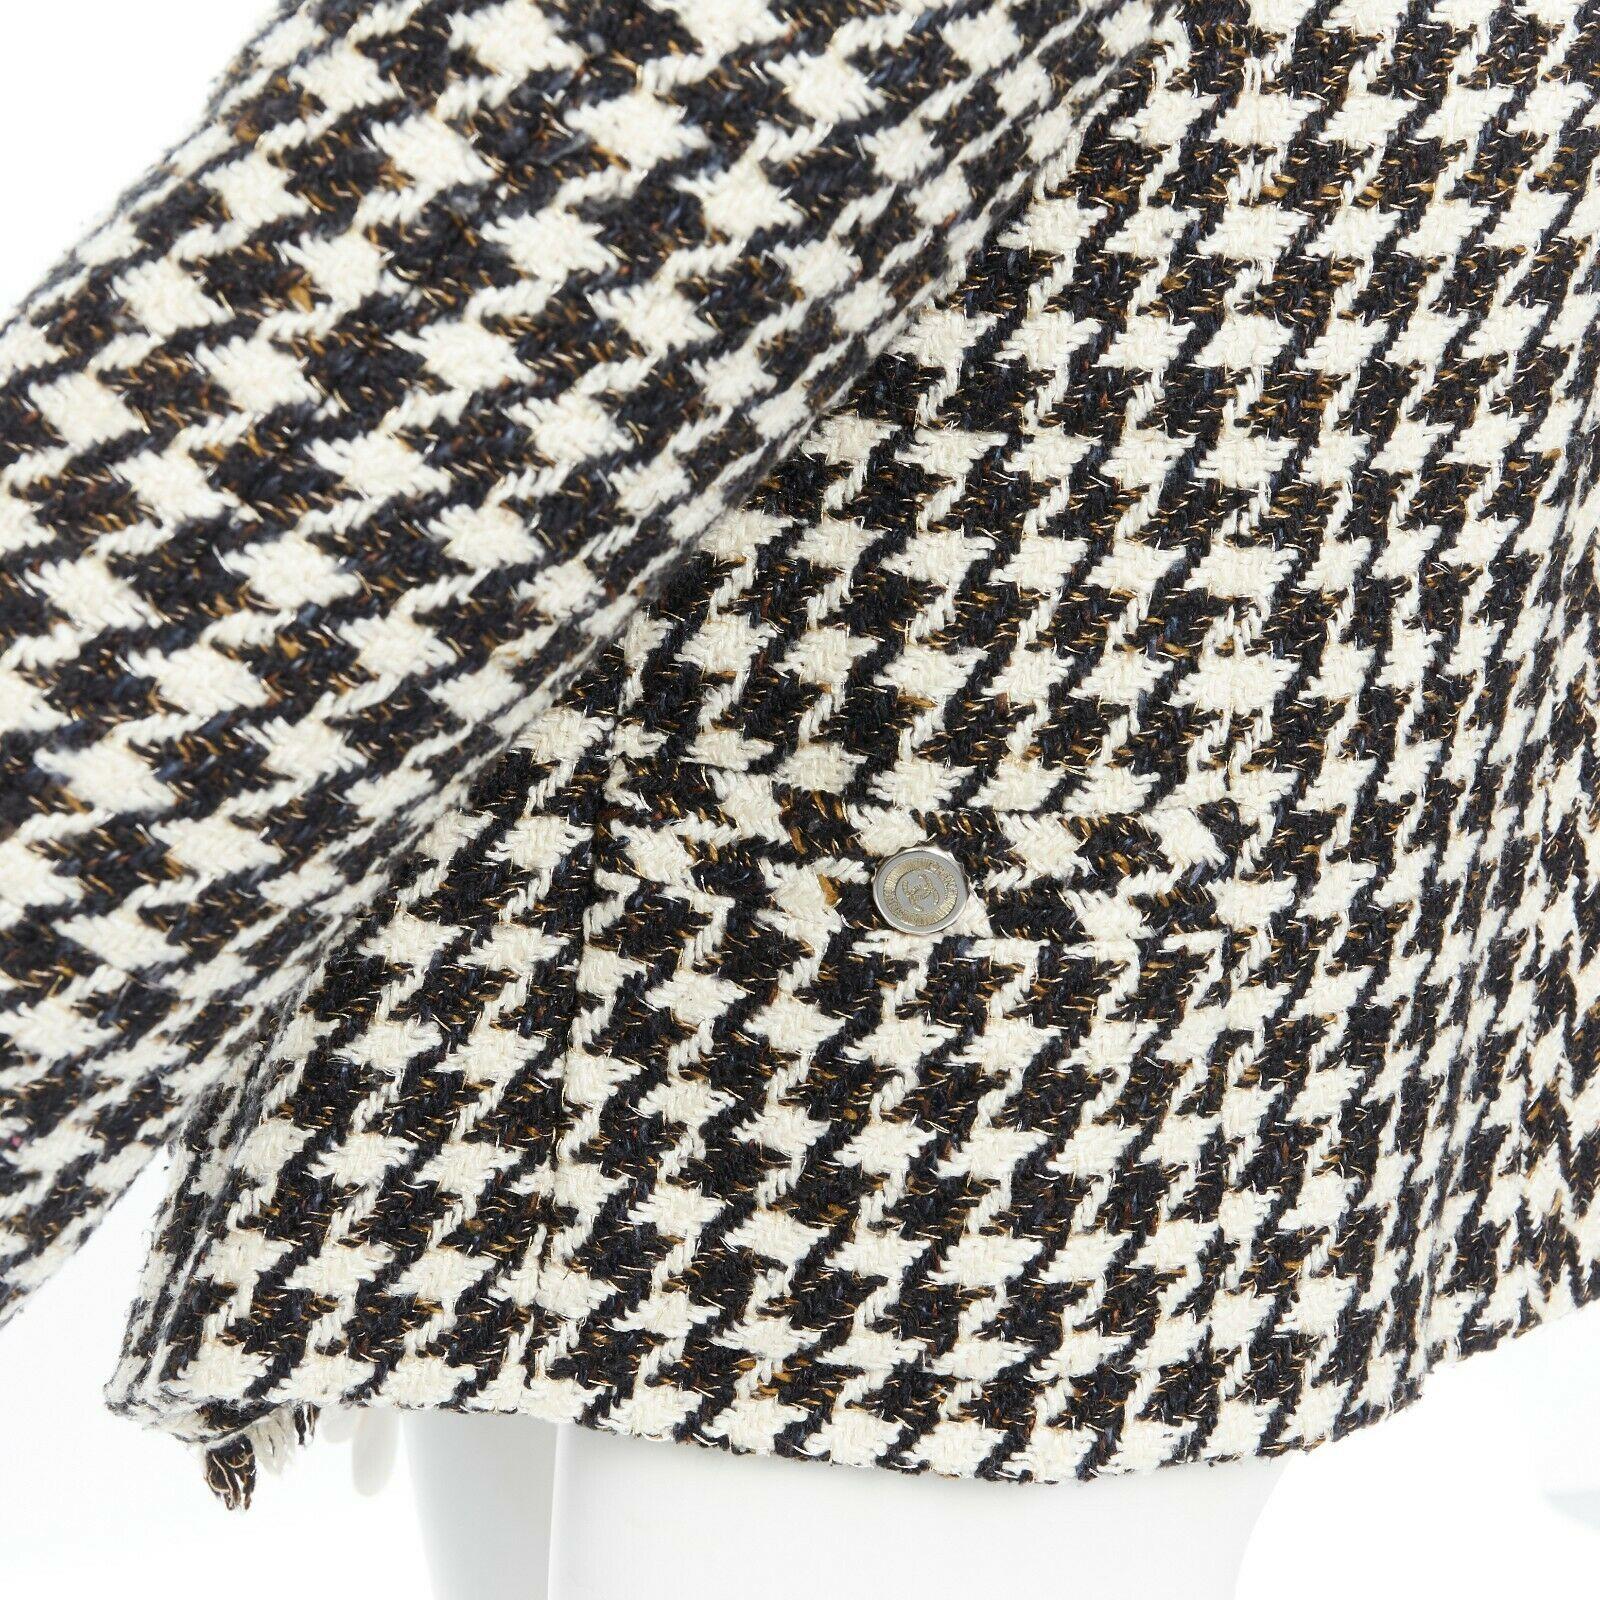 CHANEL 06P black white houndstooth tweed asymmetric wrapped front jacket FR40 2